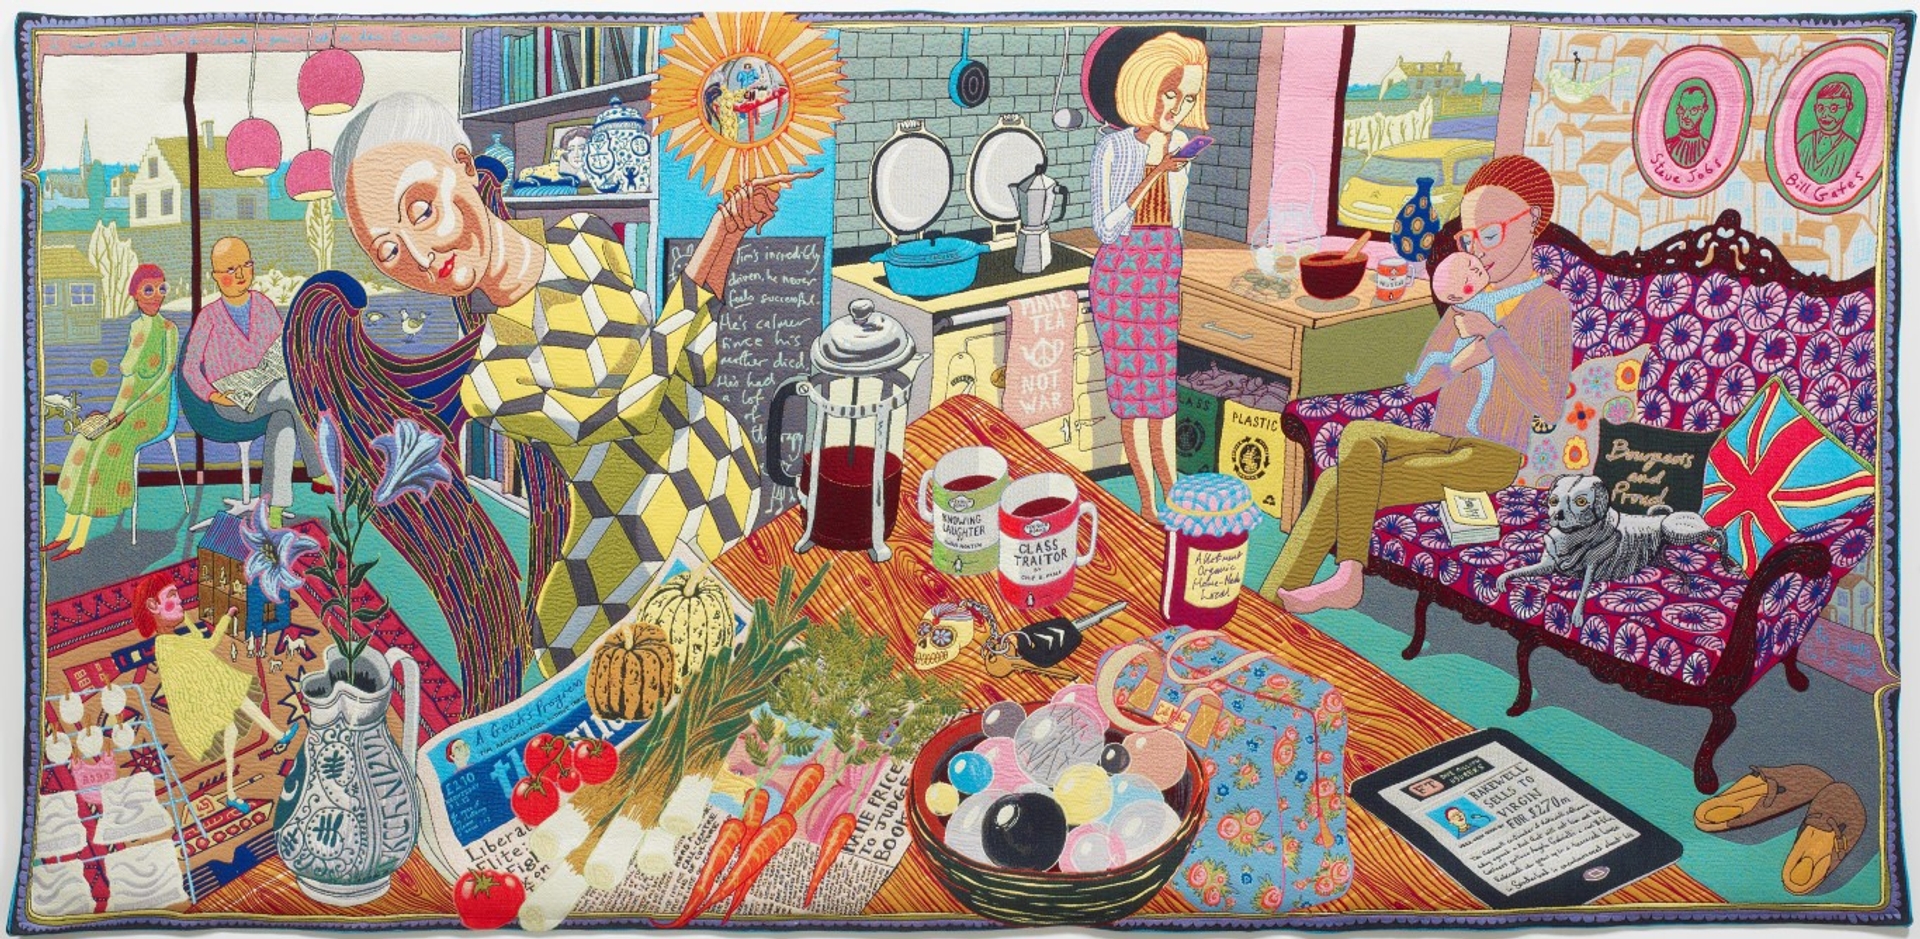 Grayson Perry The Annunciation of the Virgin Deal 2012 FULL Courtesy N. Sargent Foundation